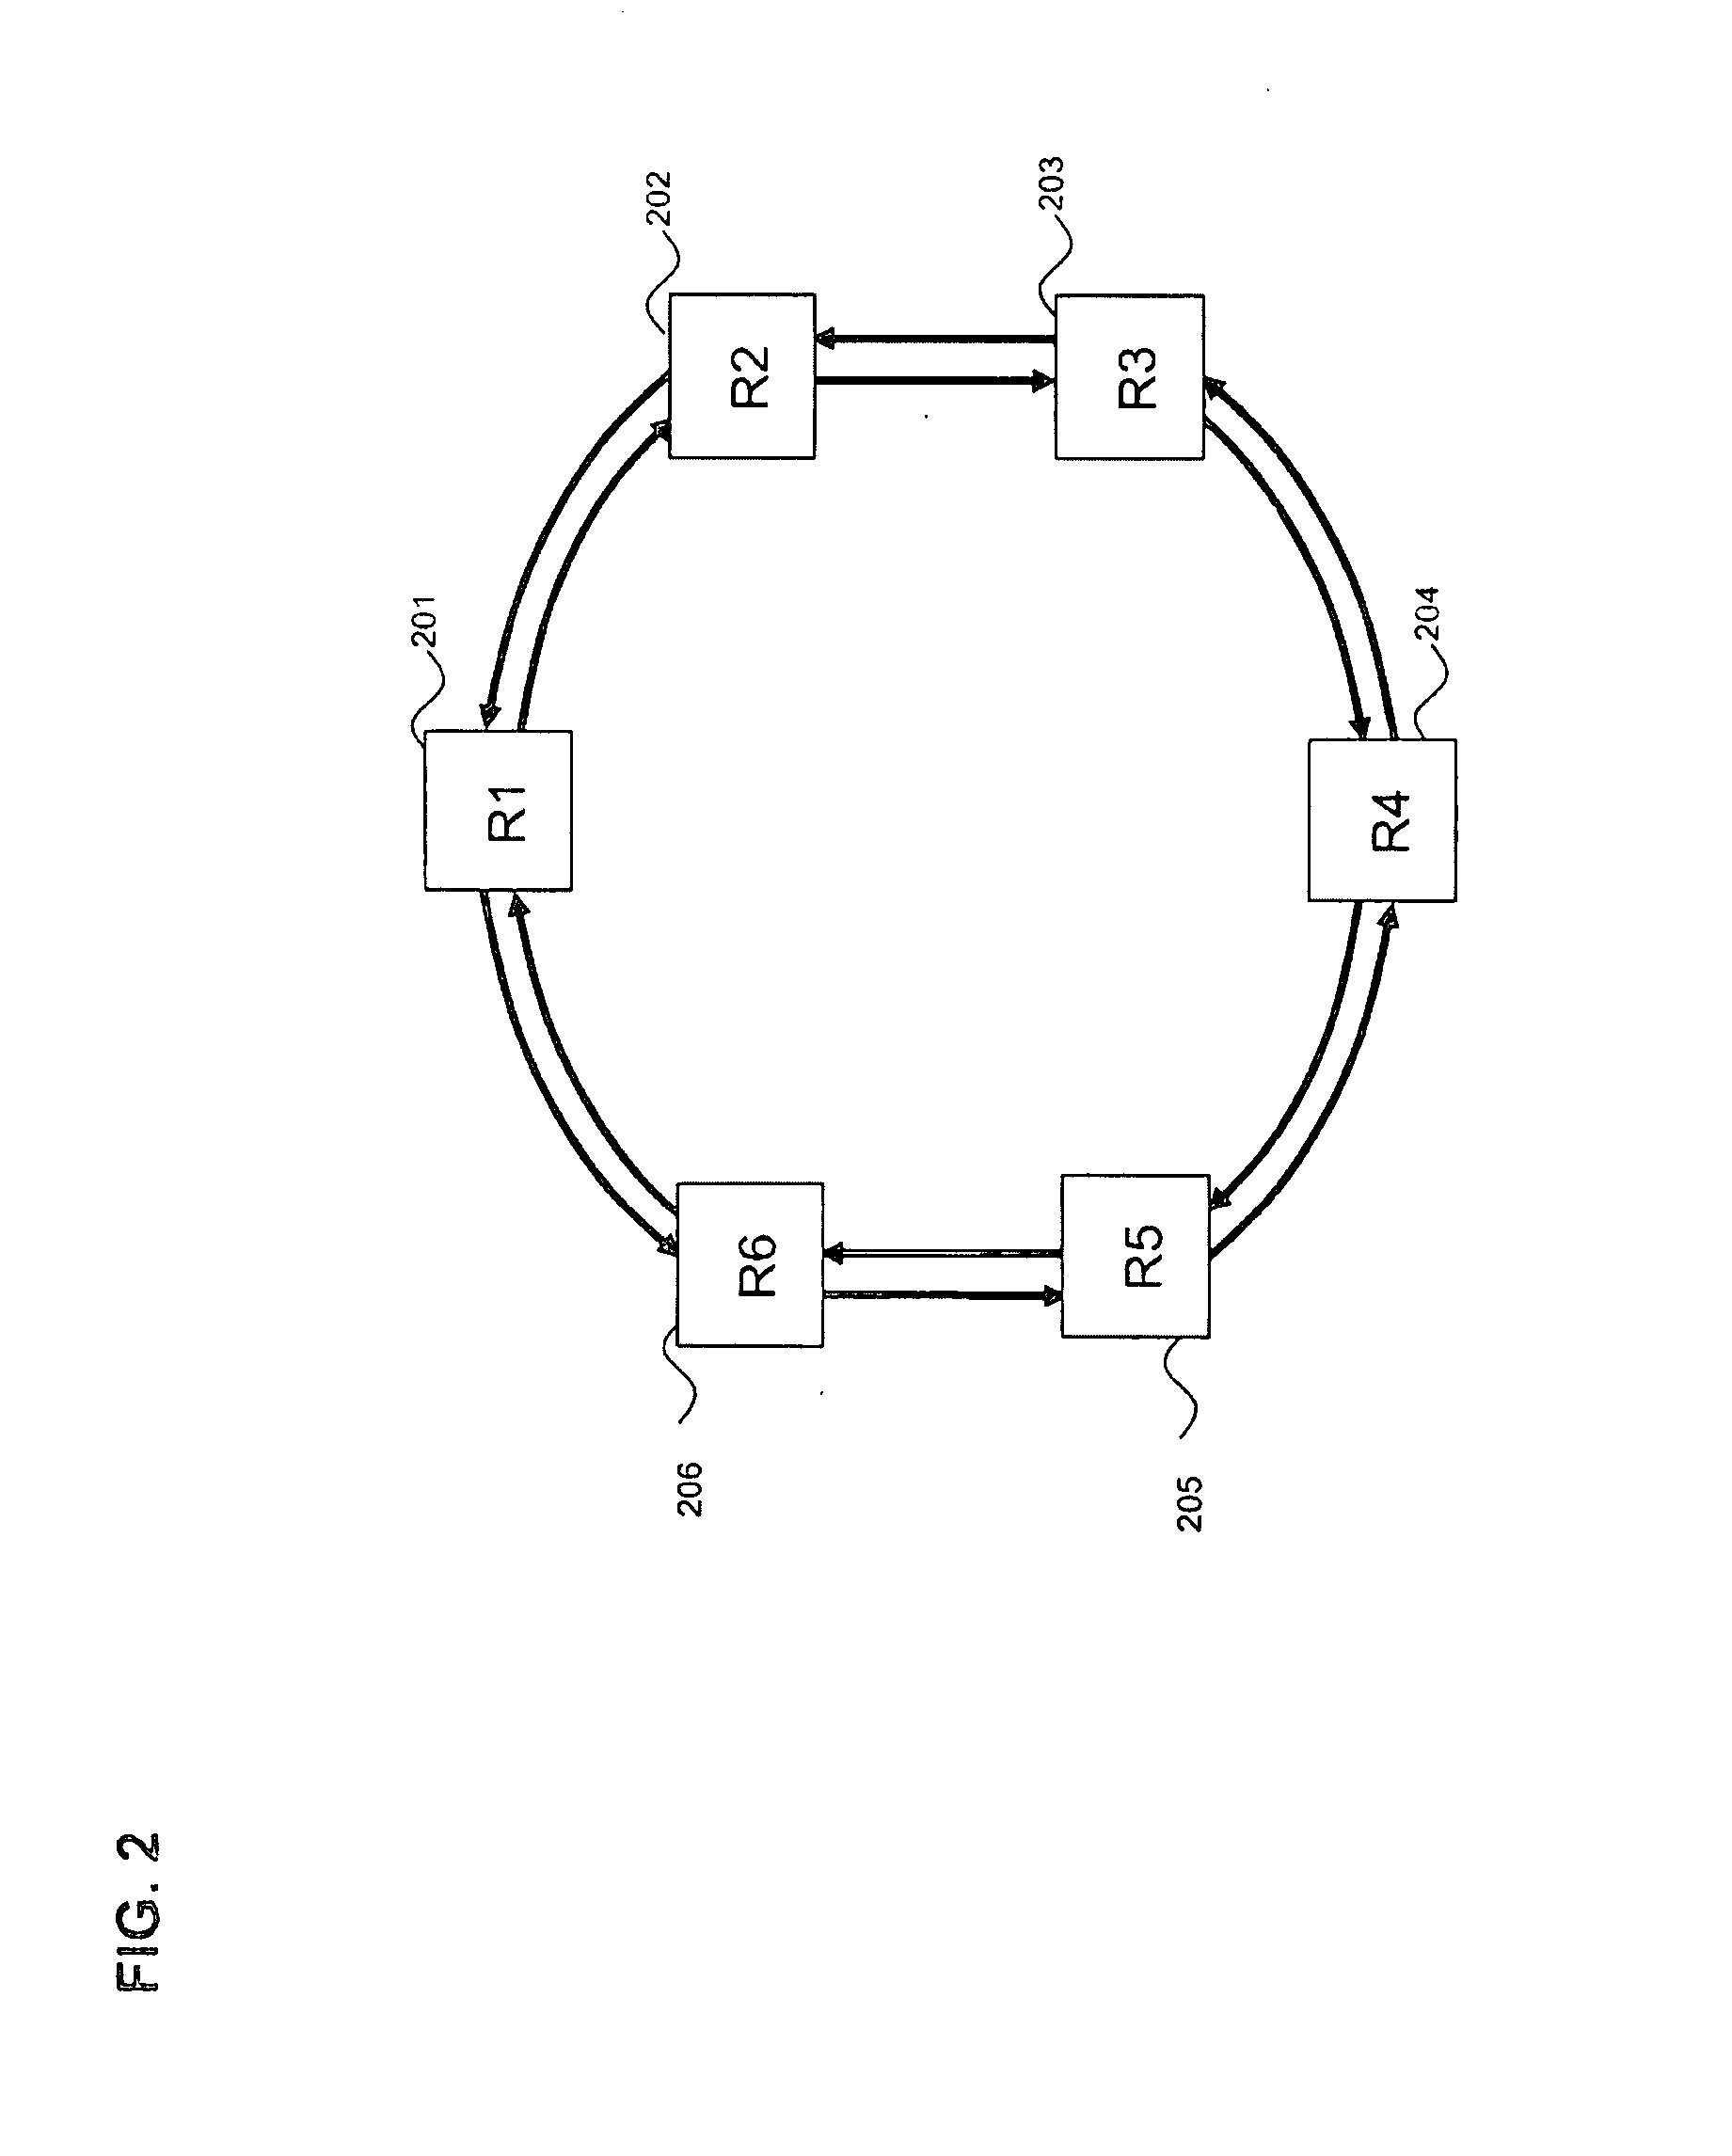 Method and apparatus for photonic resiliency of a packet switched network